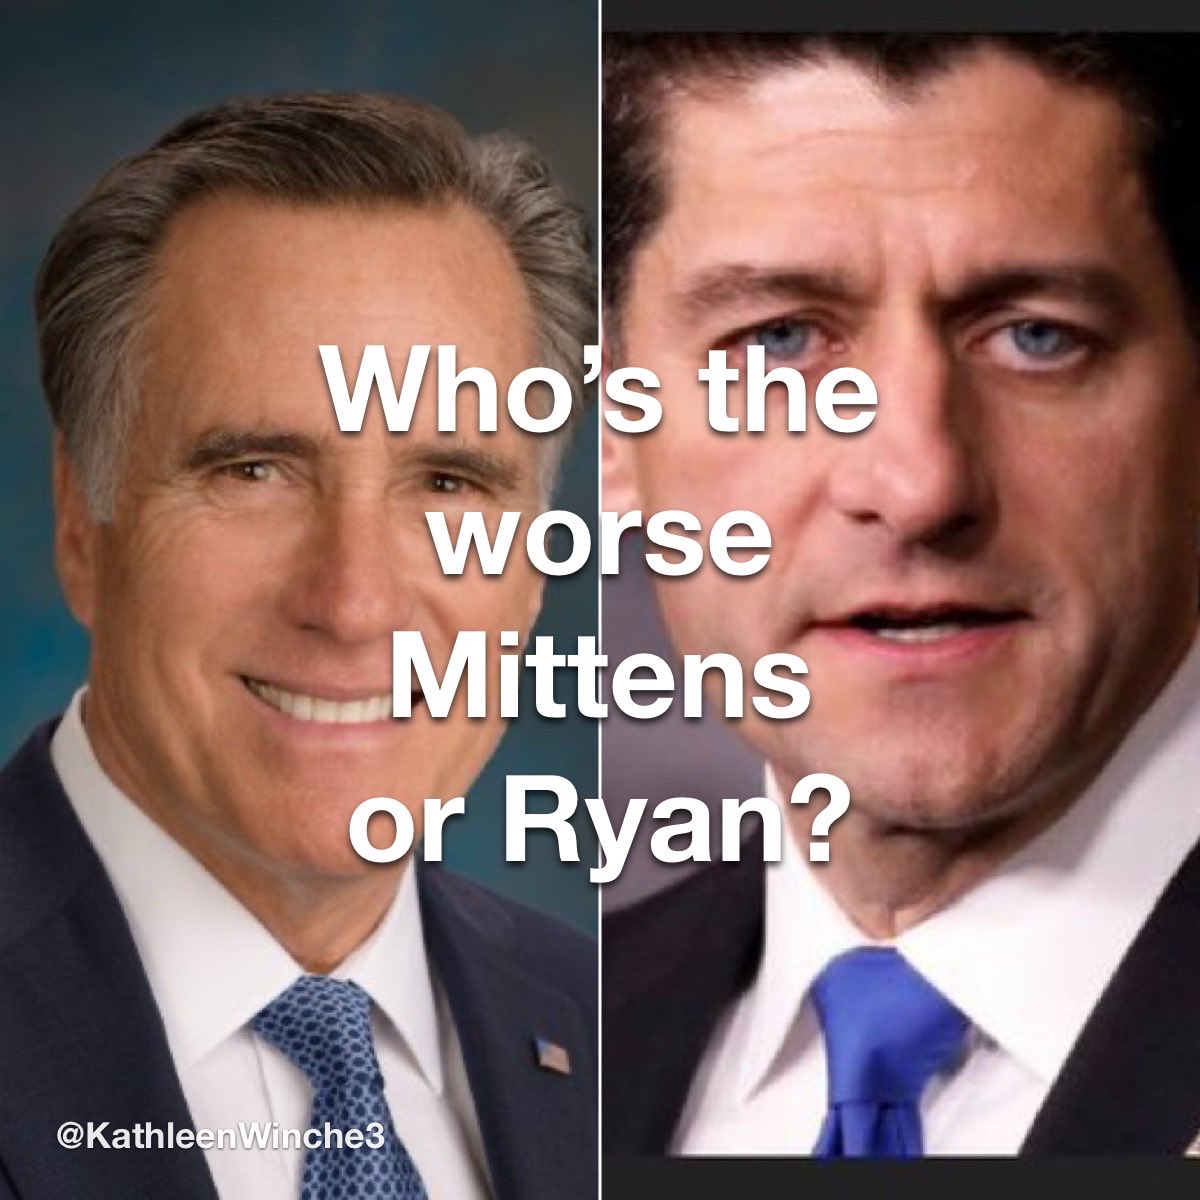 I don’t know I don’t like either one! Mittens I guess!